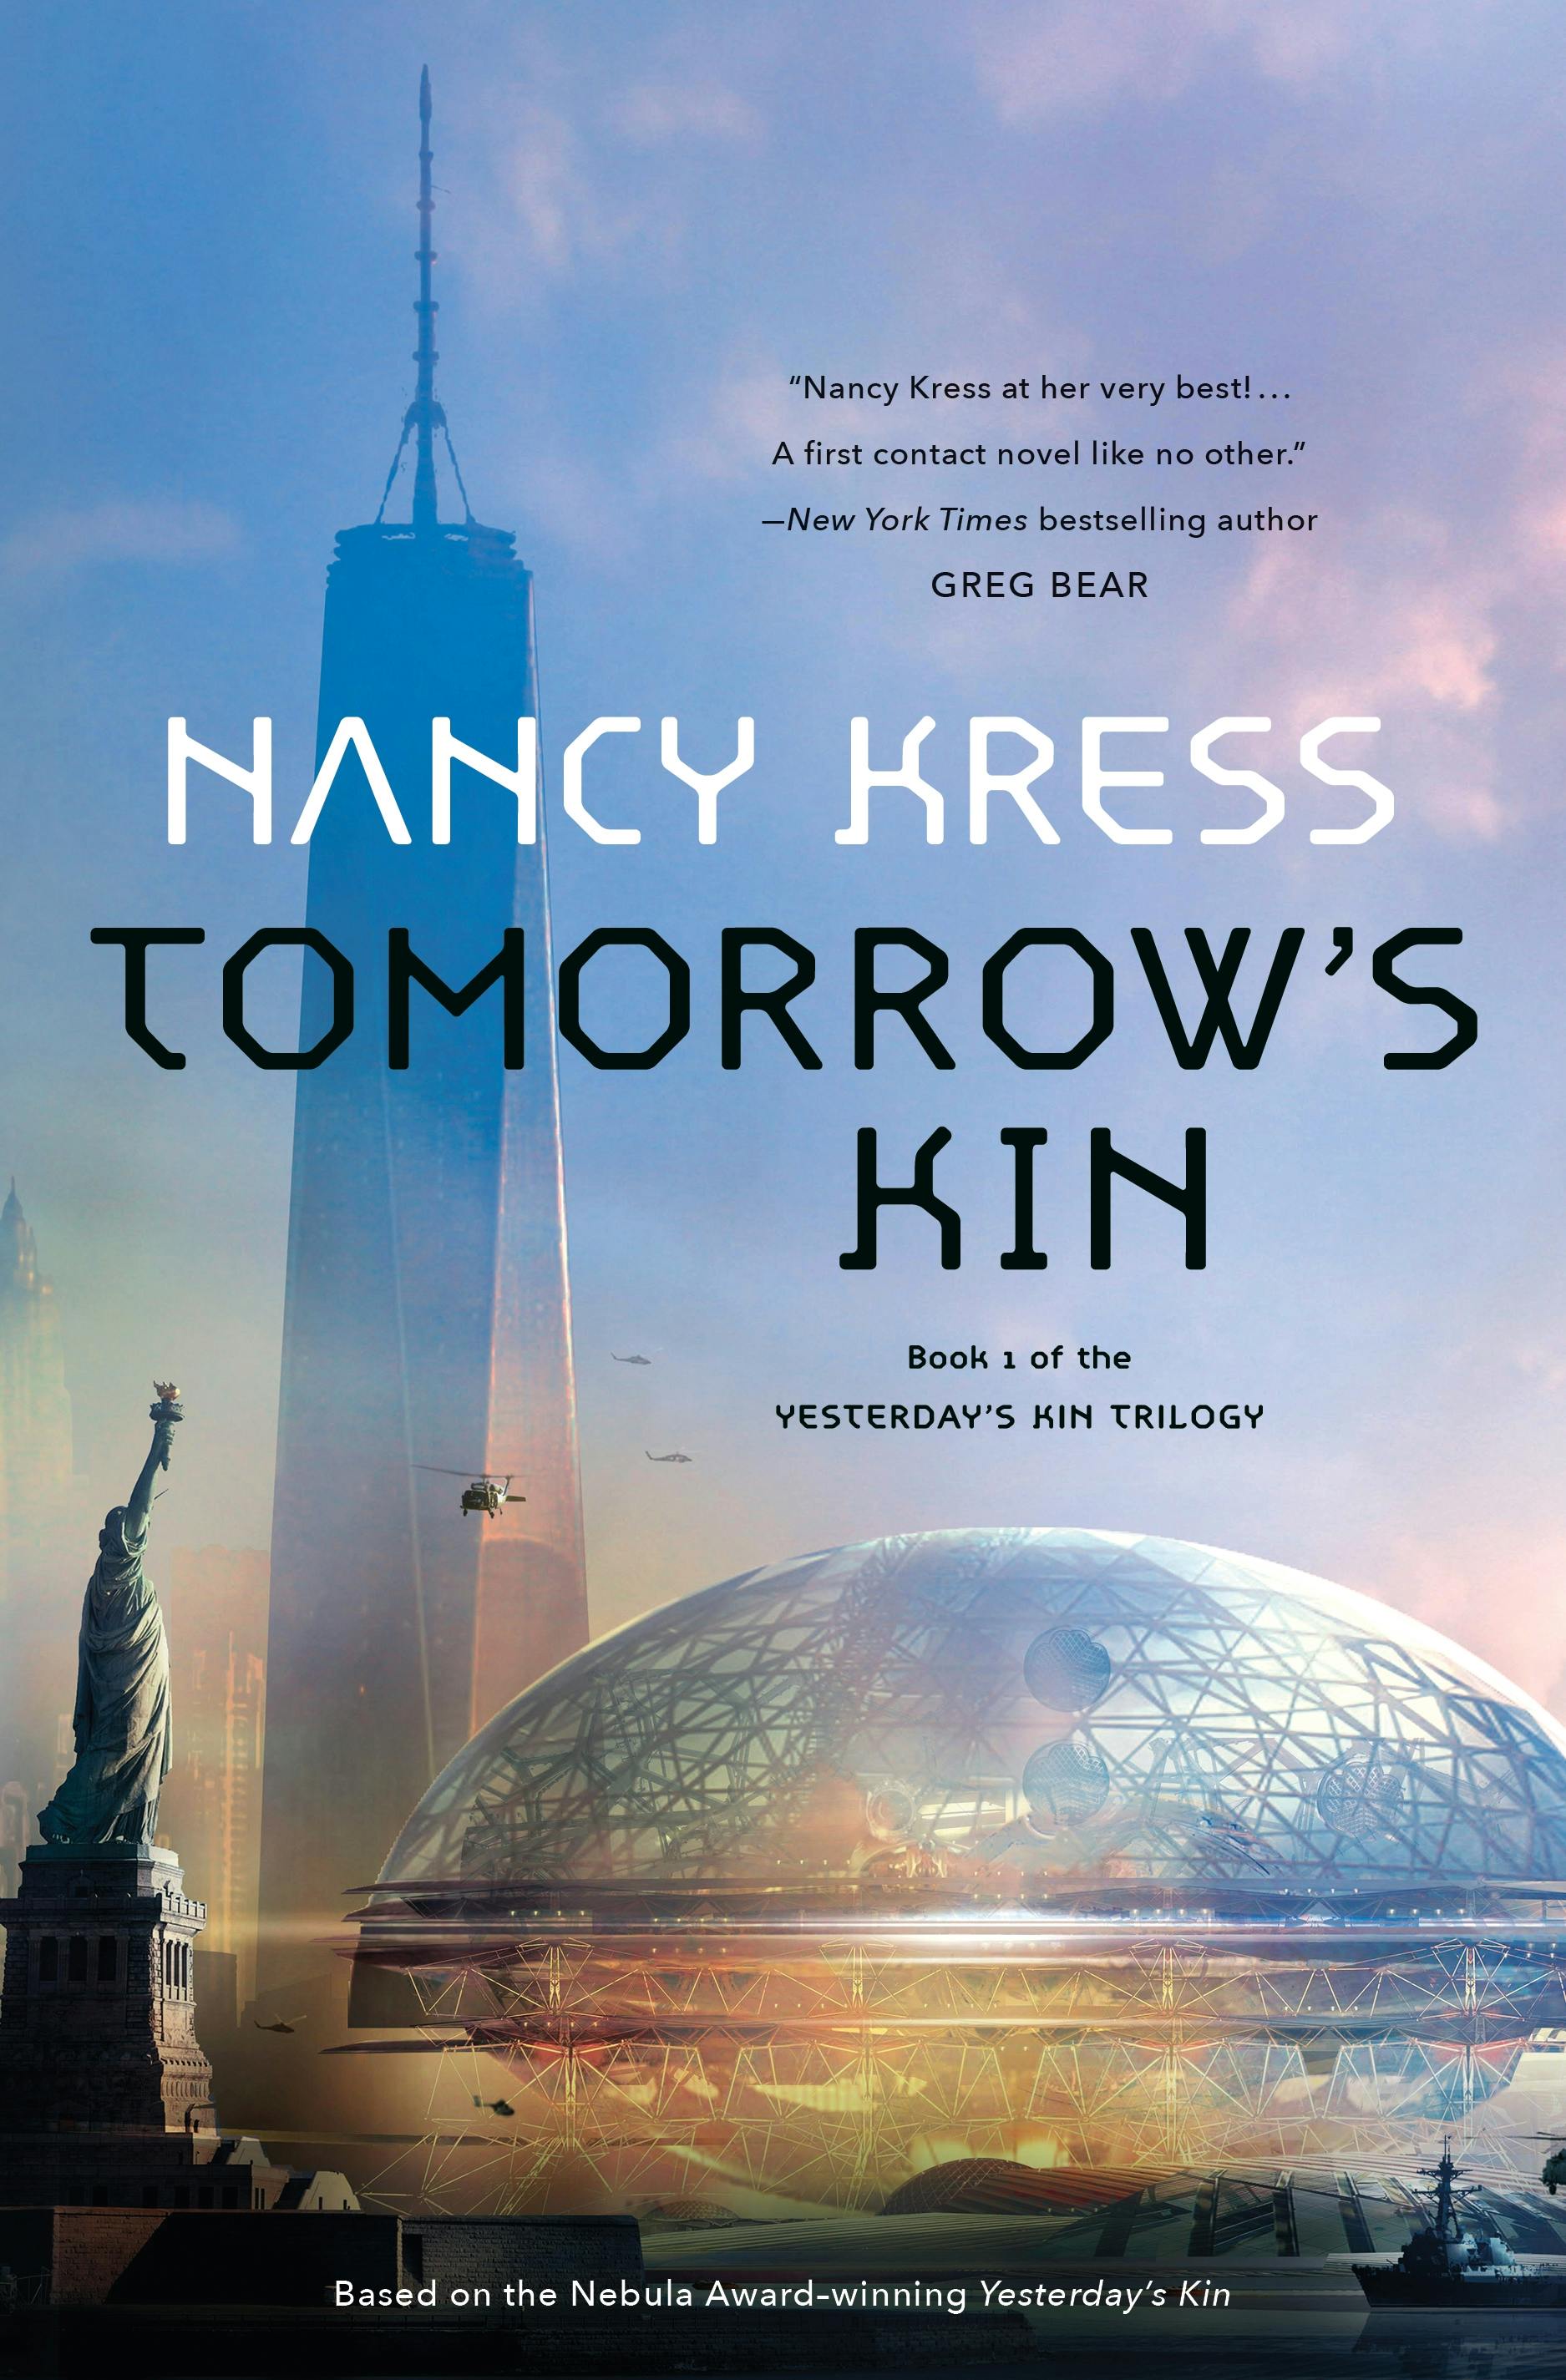 Cover for the book titled as: Tomorrow's Kin